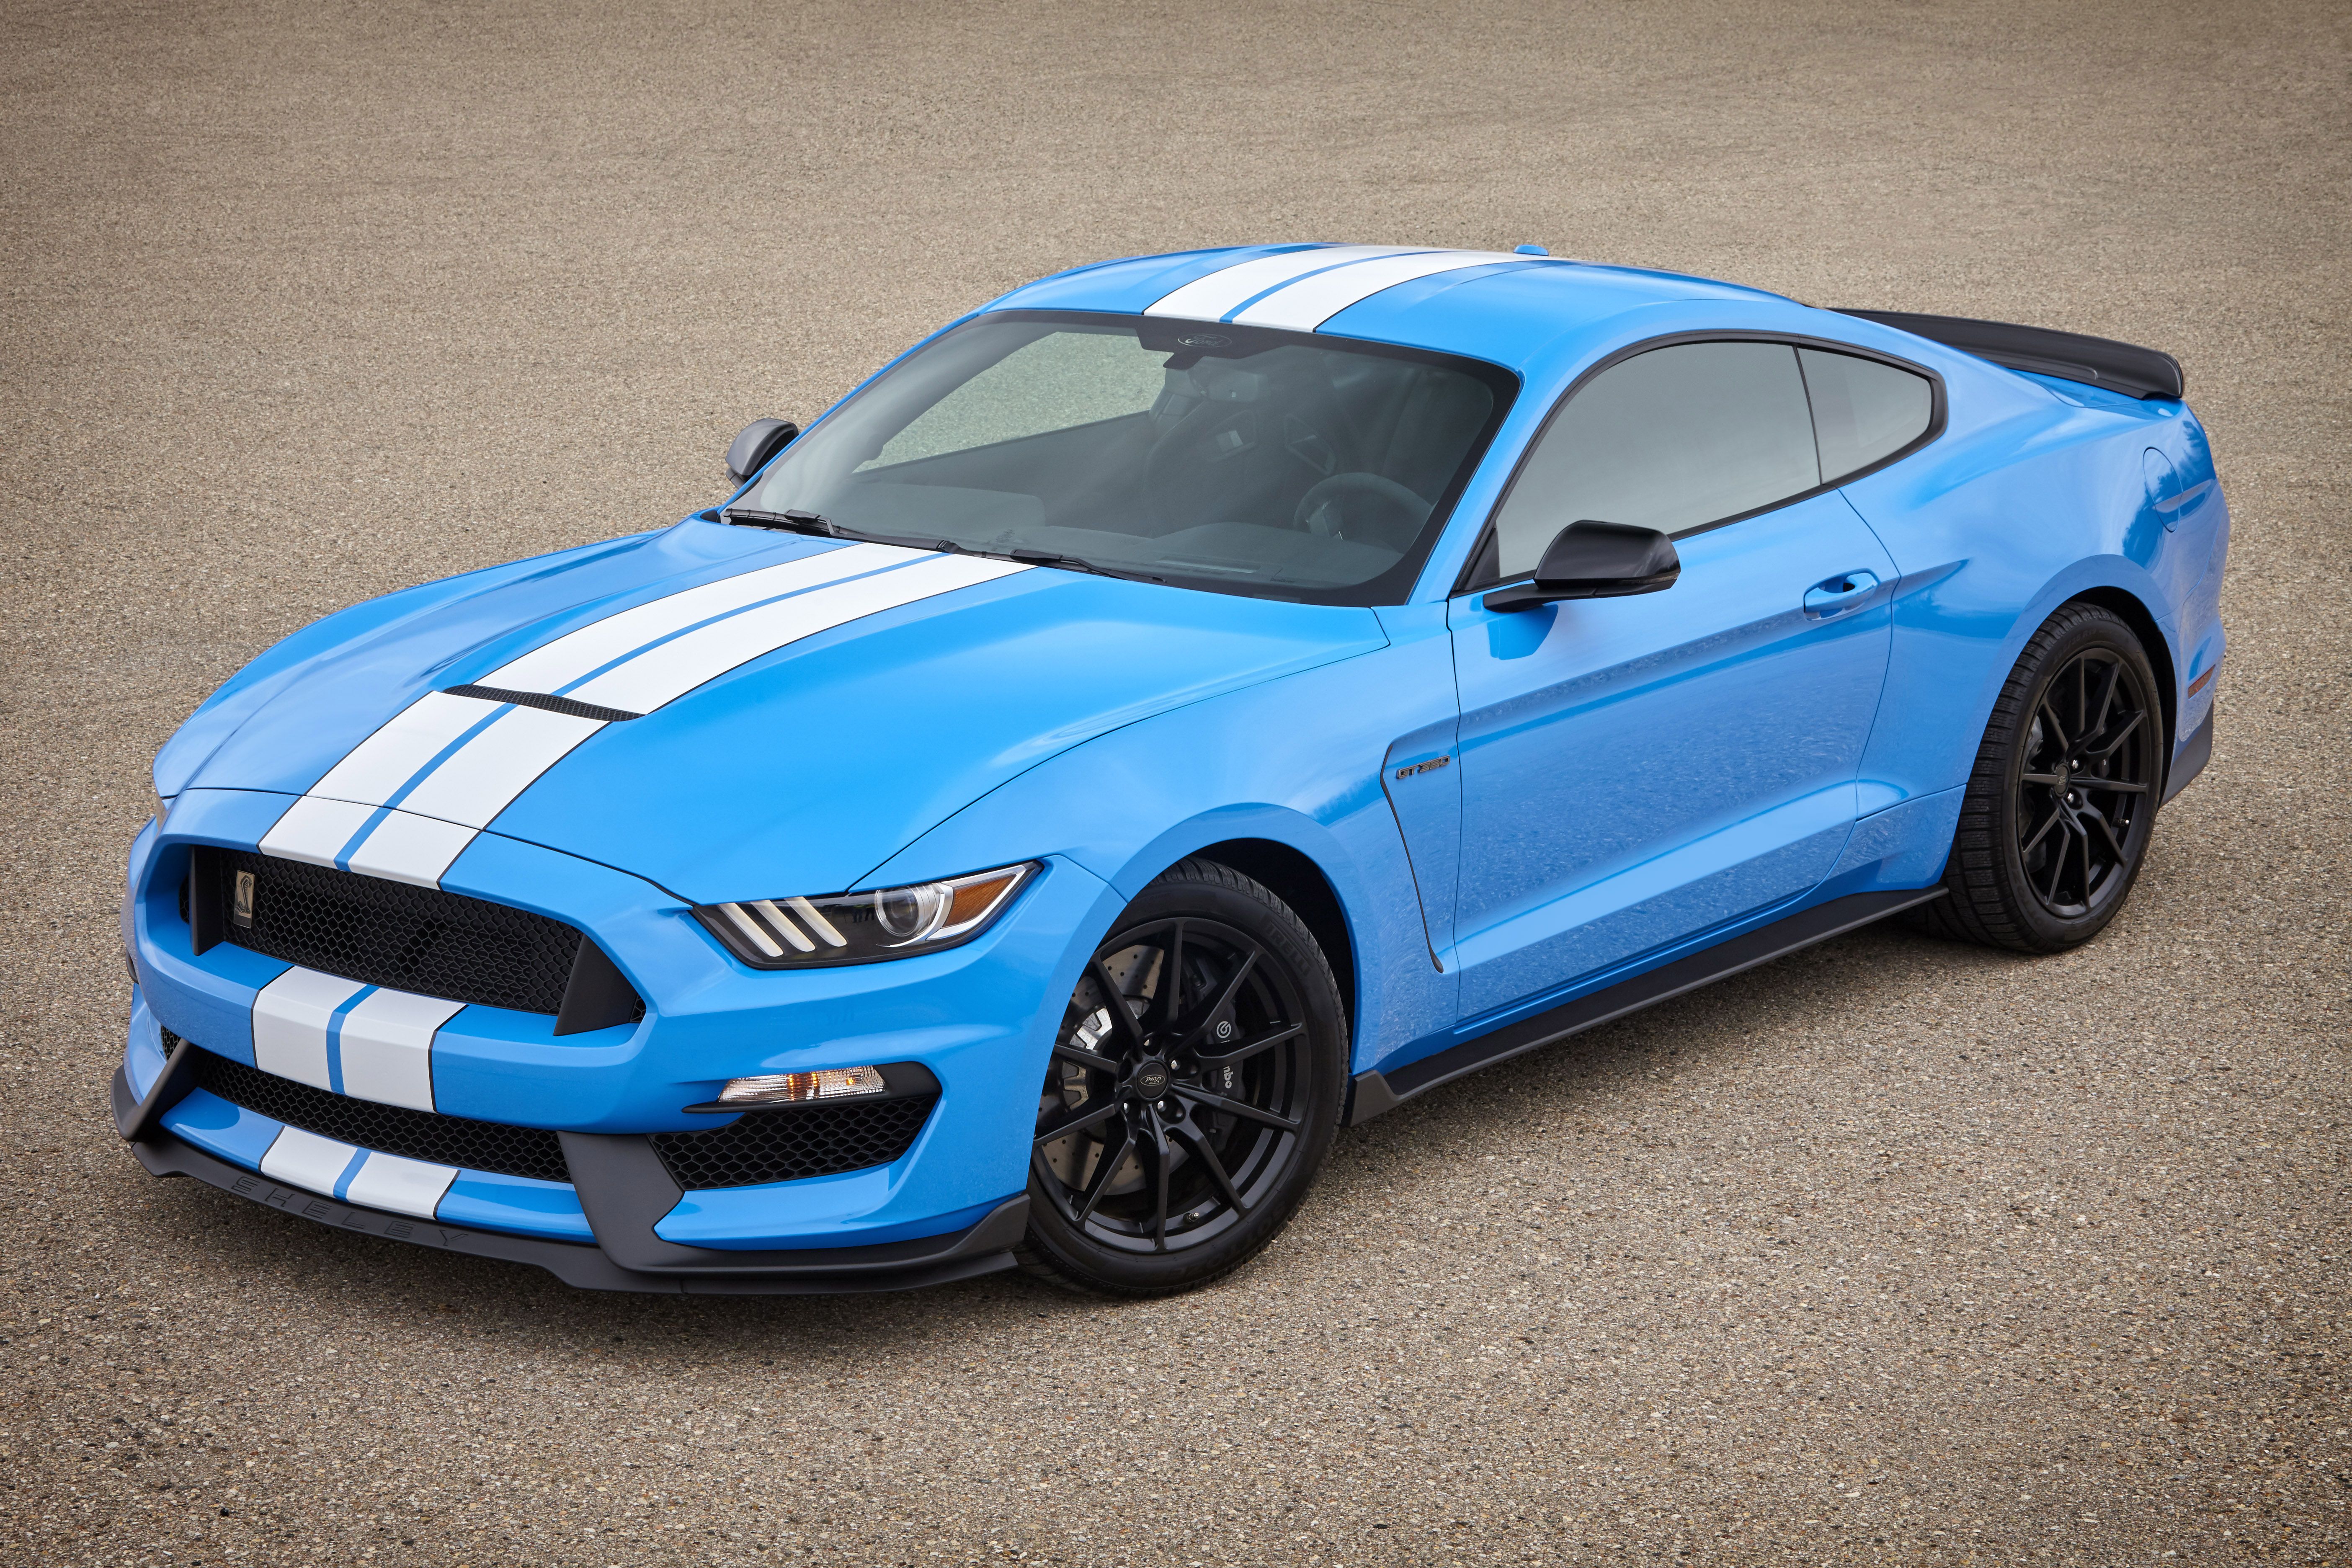 Testing the ultimate Mustang - the Shelby GT350 [Video]